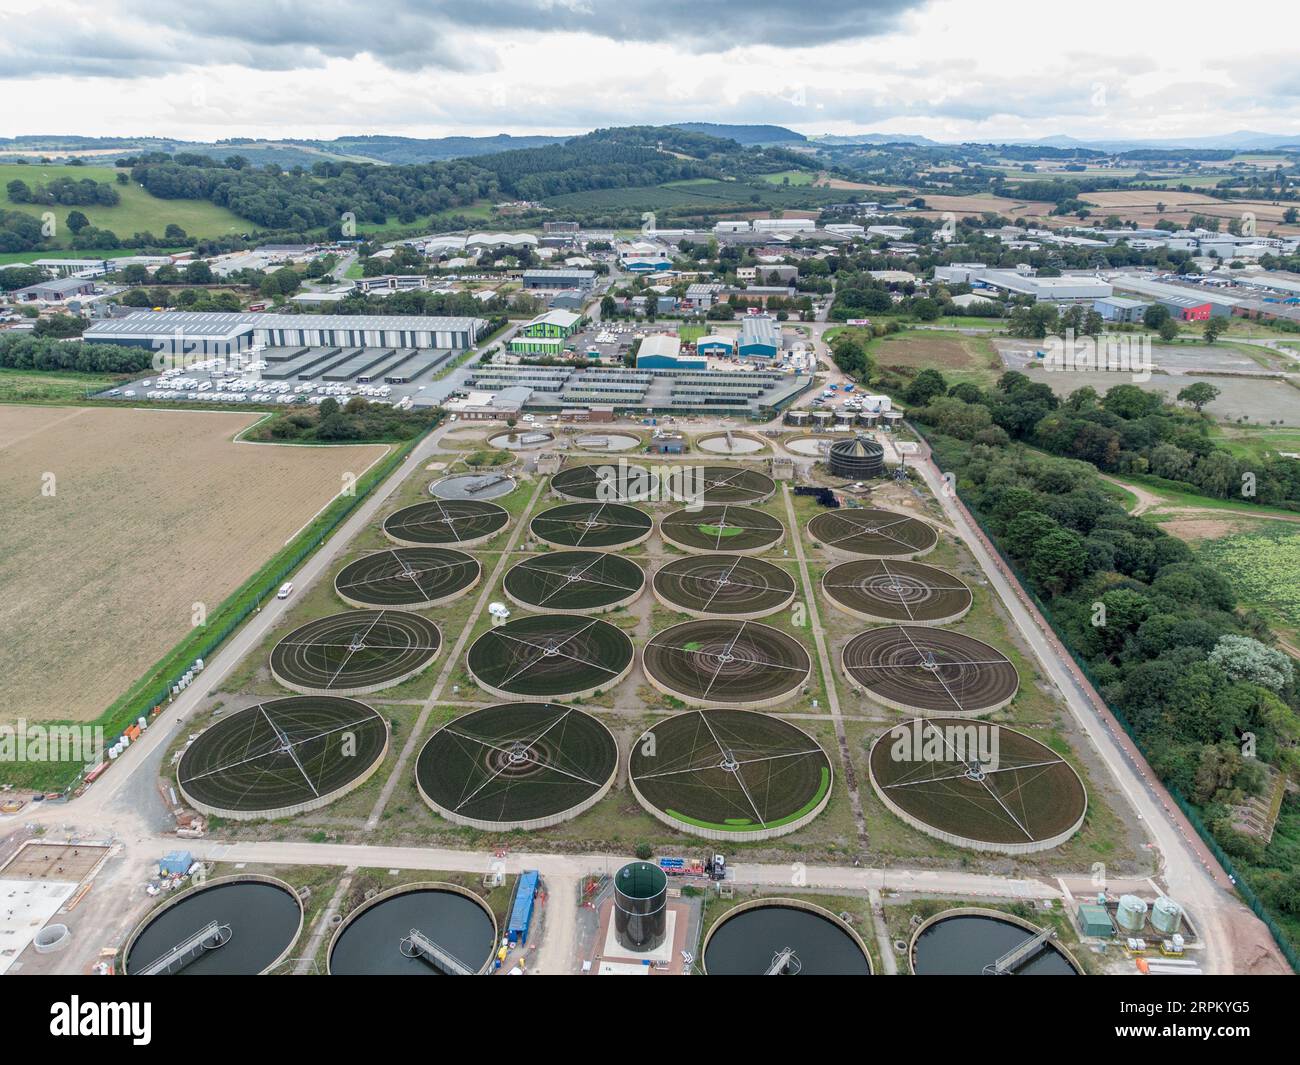 Drone image of Sewage treatment works at Hereford England Stock Photo